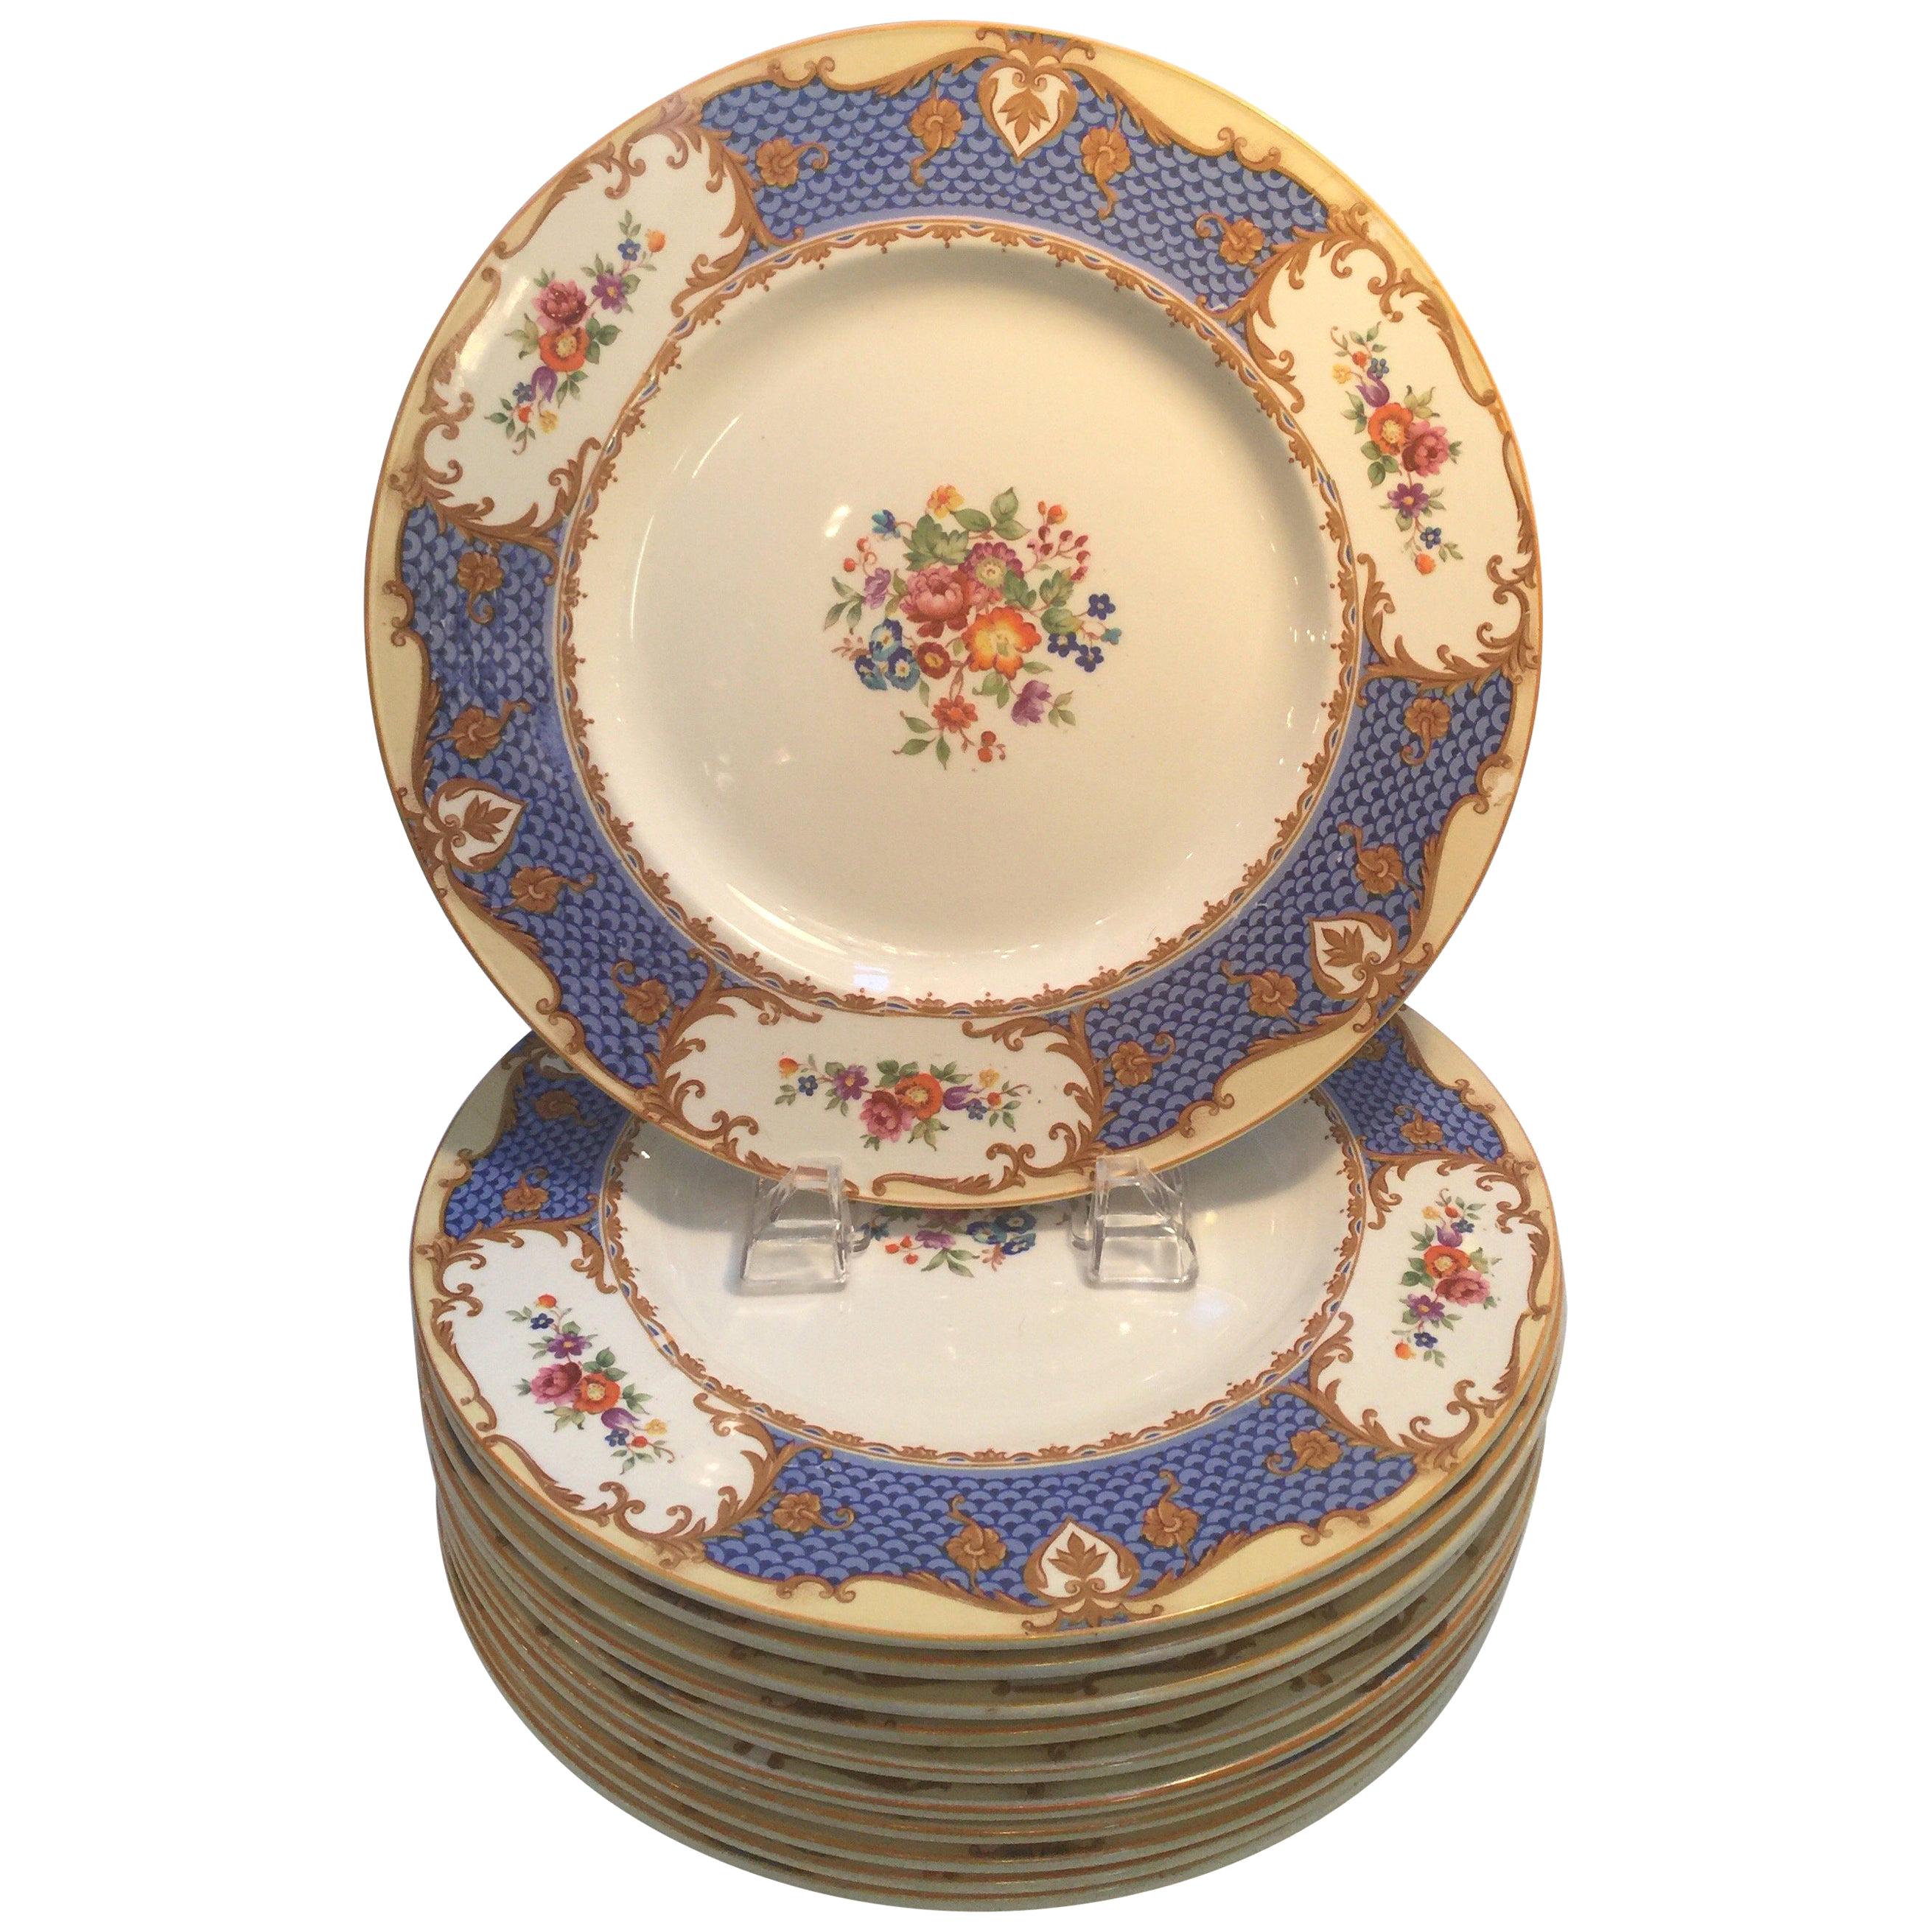 Set of Ten Hand Painted English Service Plates